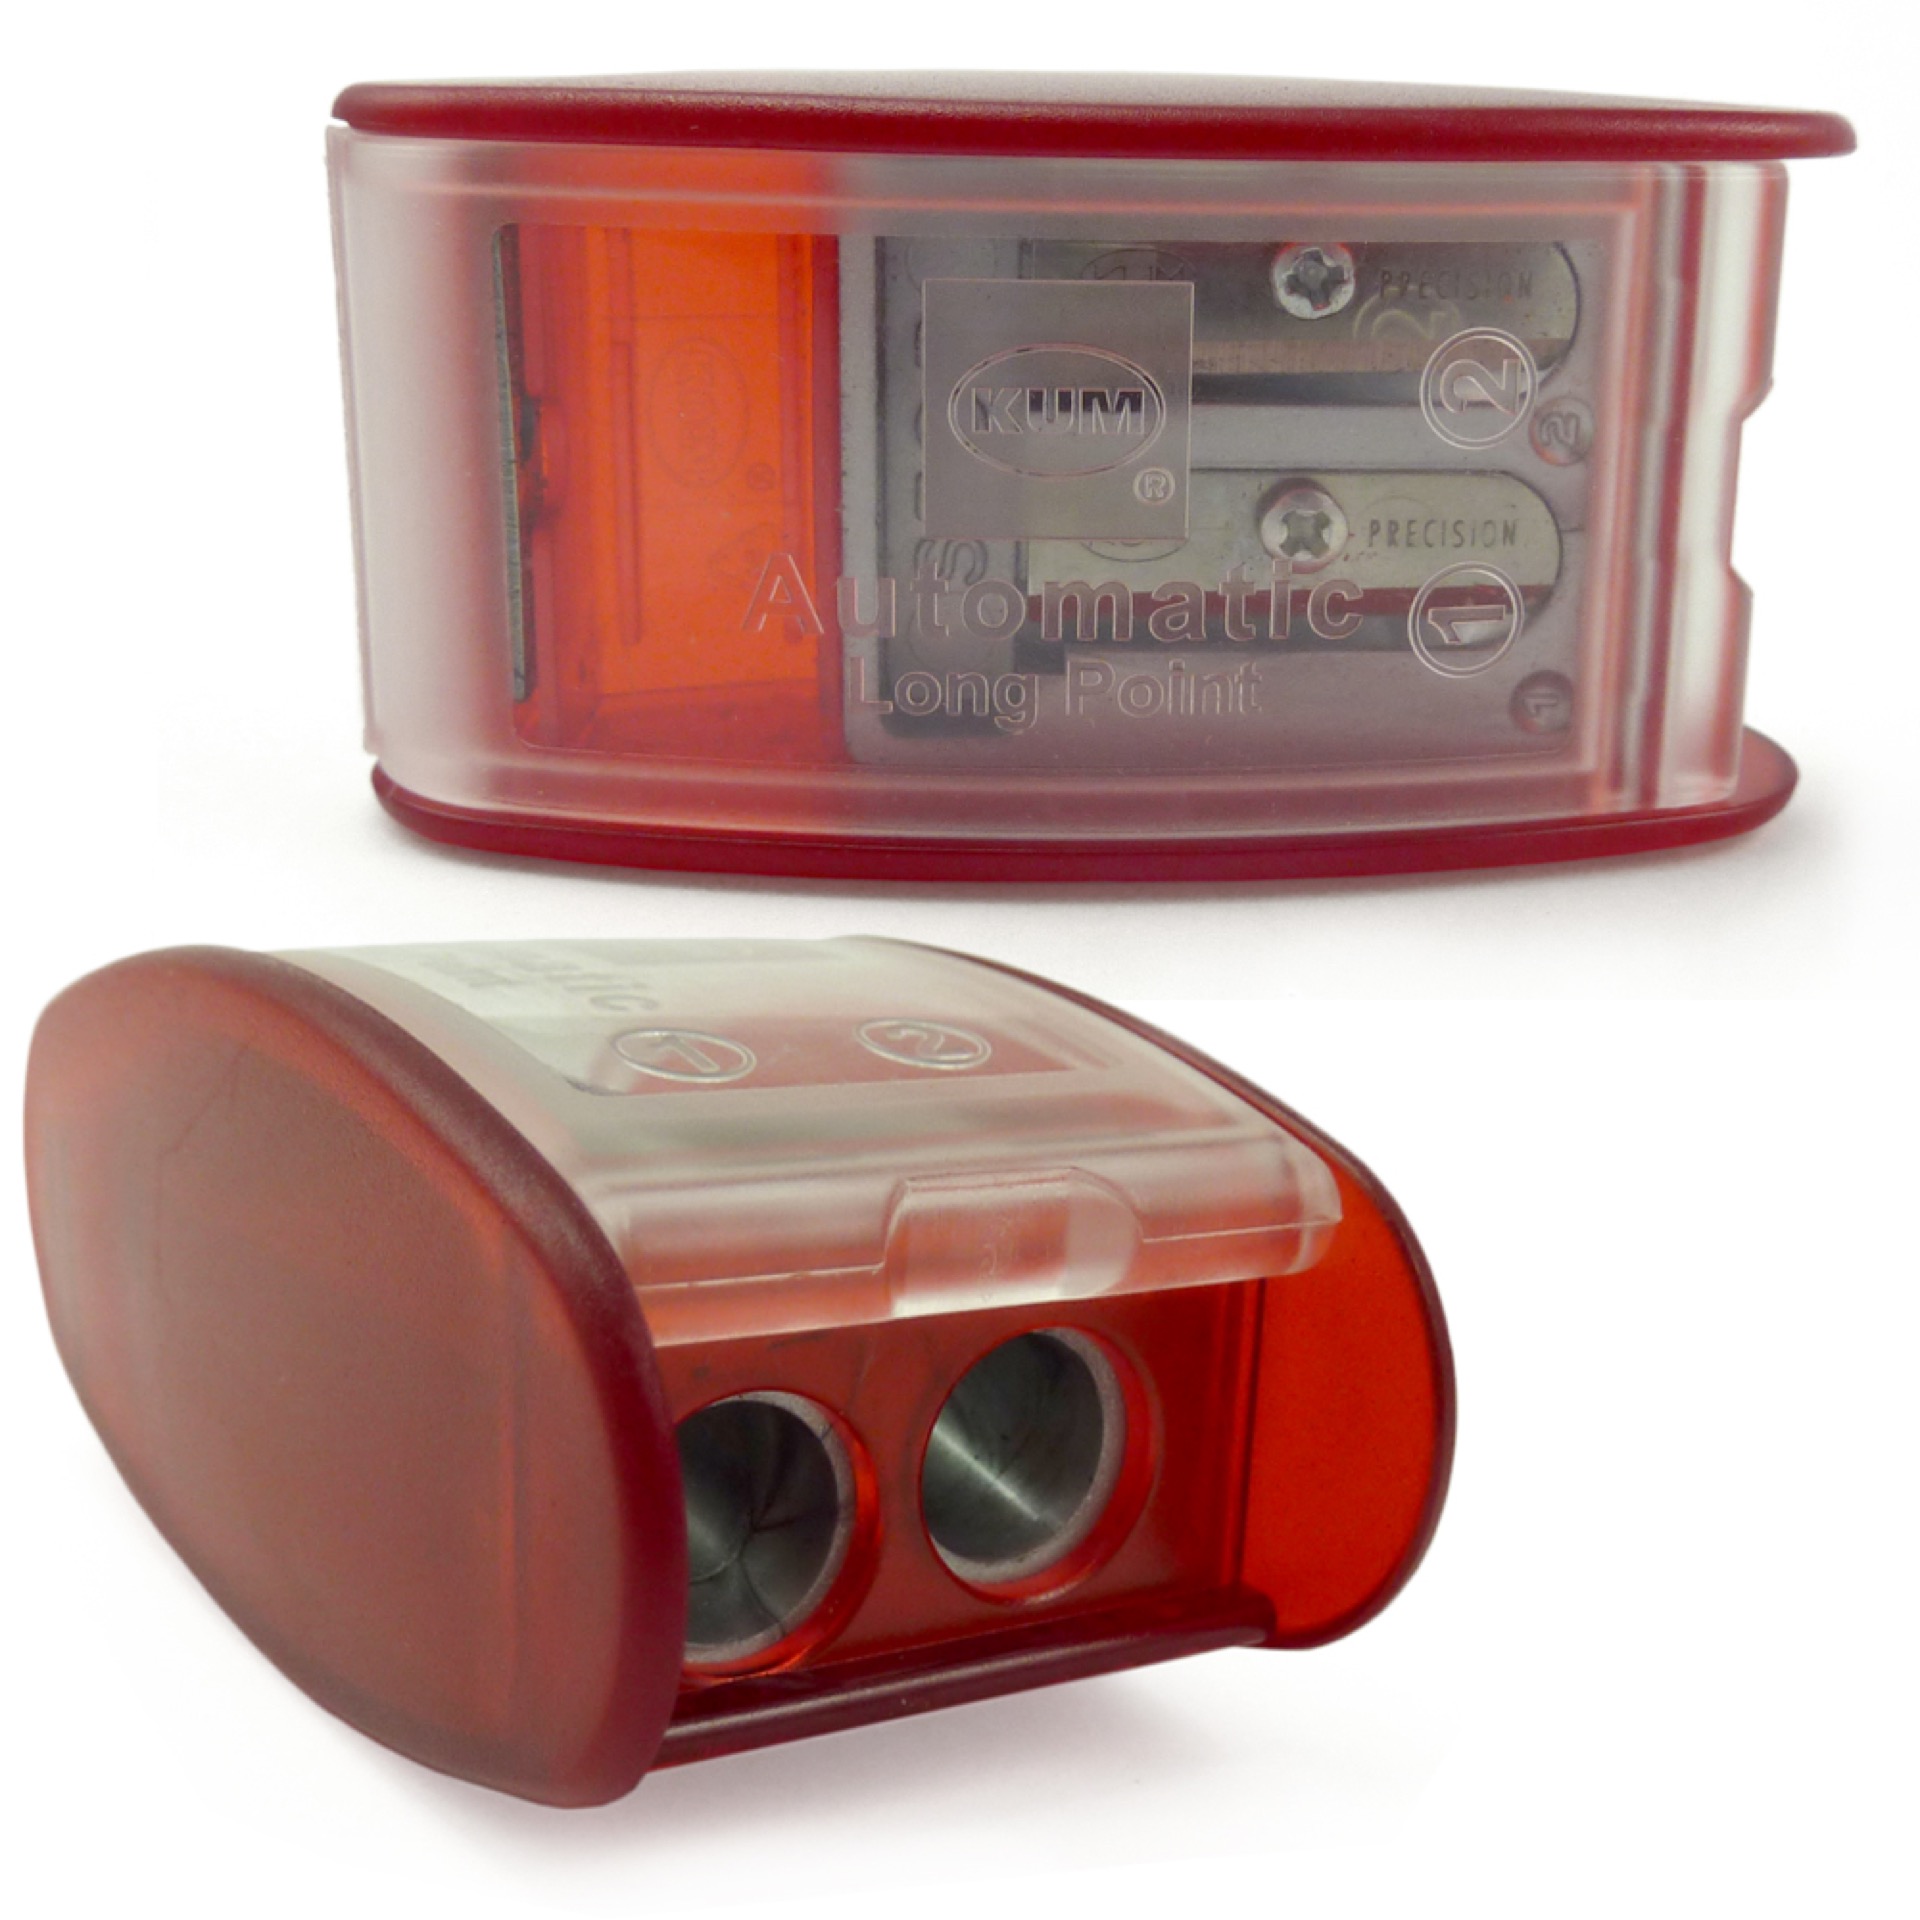 Long Point Pencil Sharpener, Pencil Sharpeners for Art,Drawing Pencil  Sharpener for Artists - Red